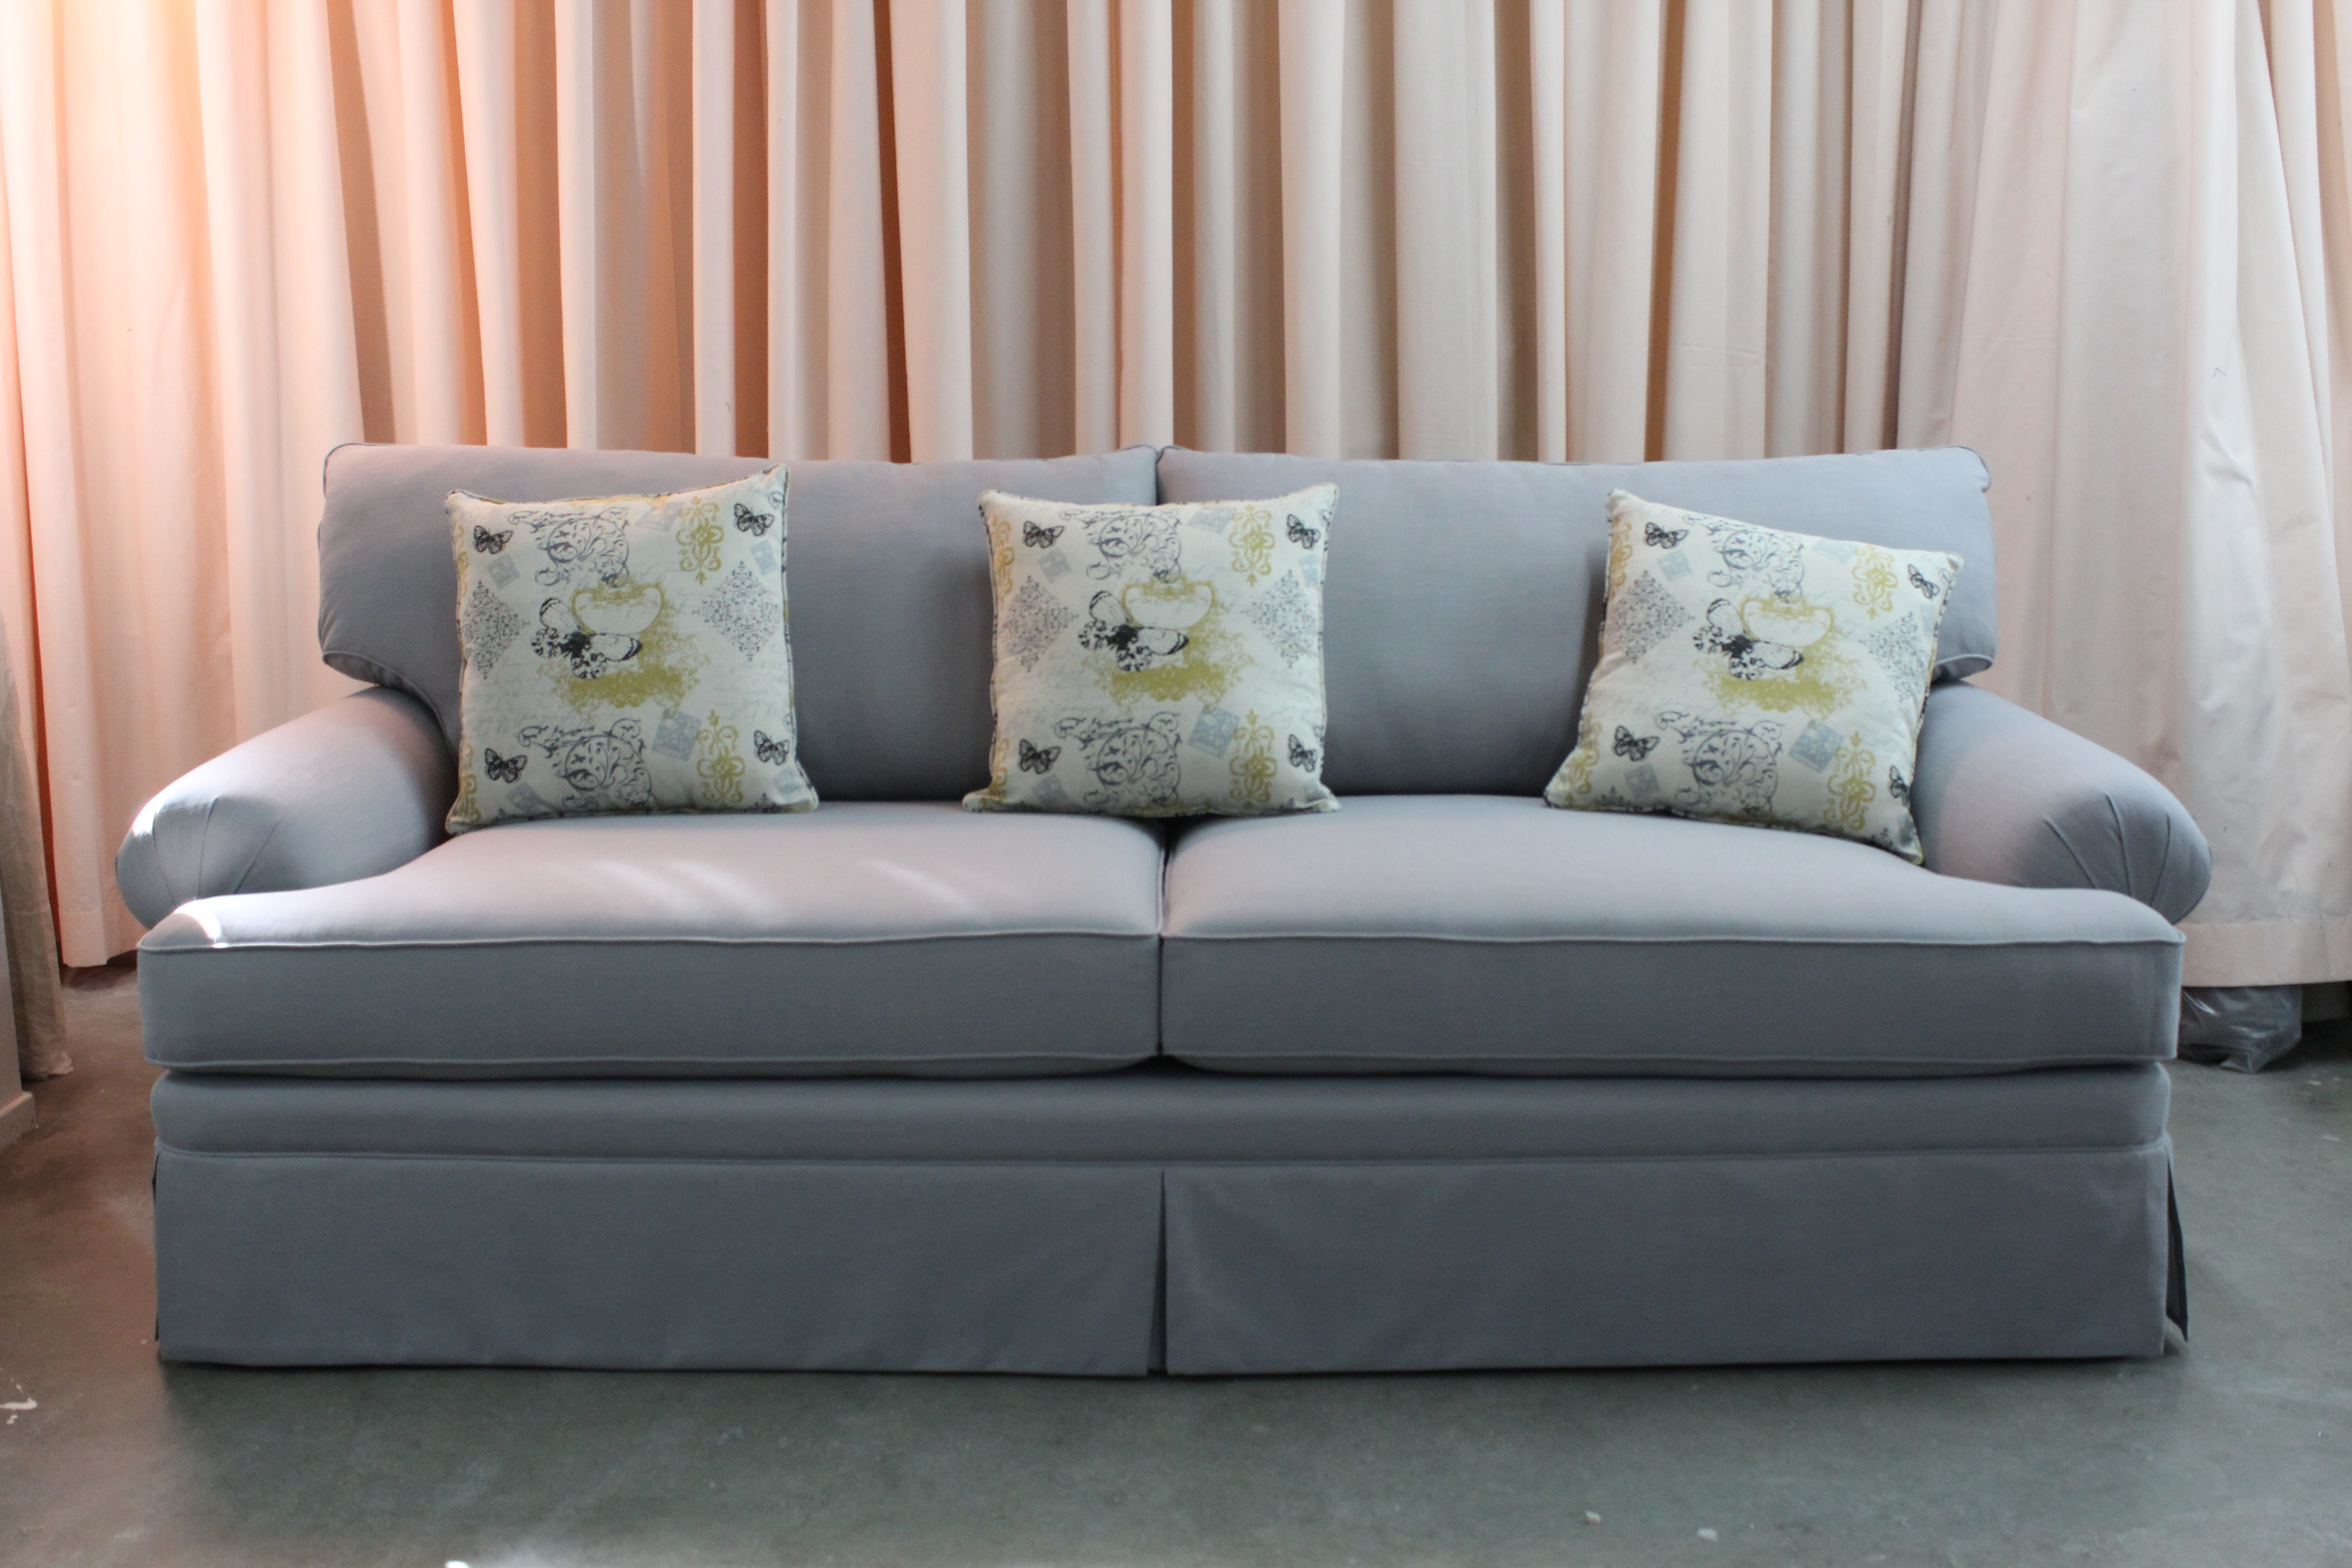 Sofa with Funky Cushions